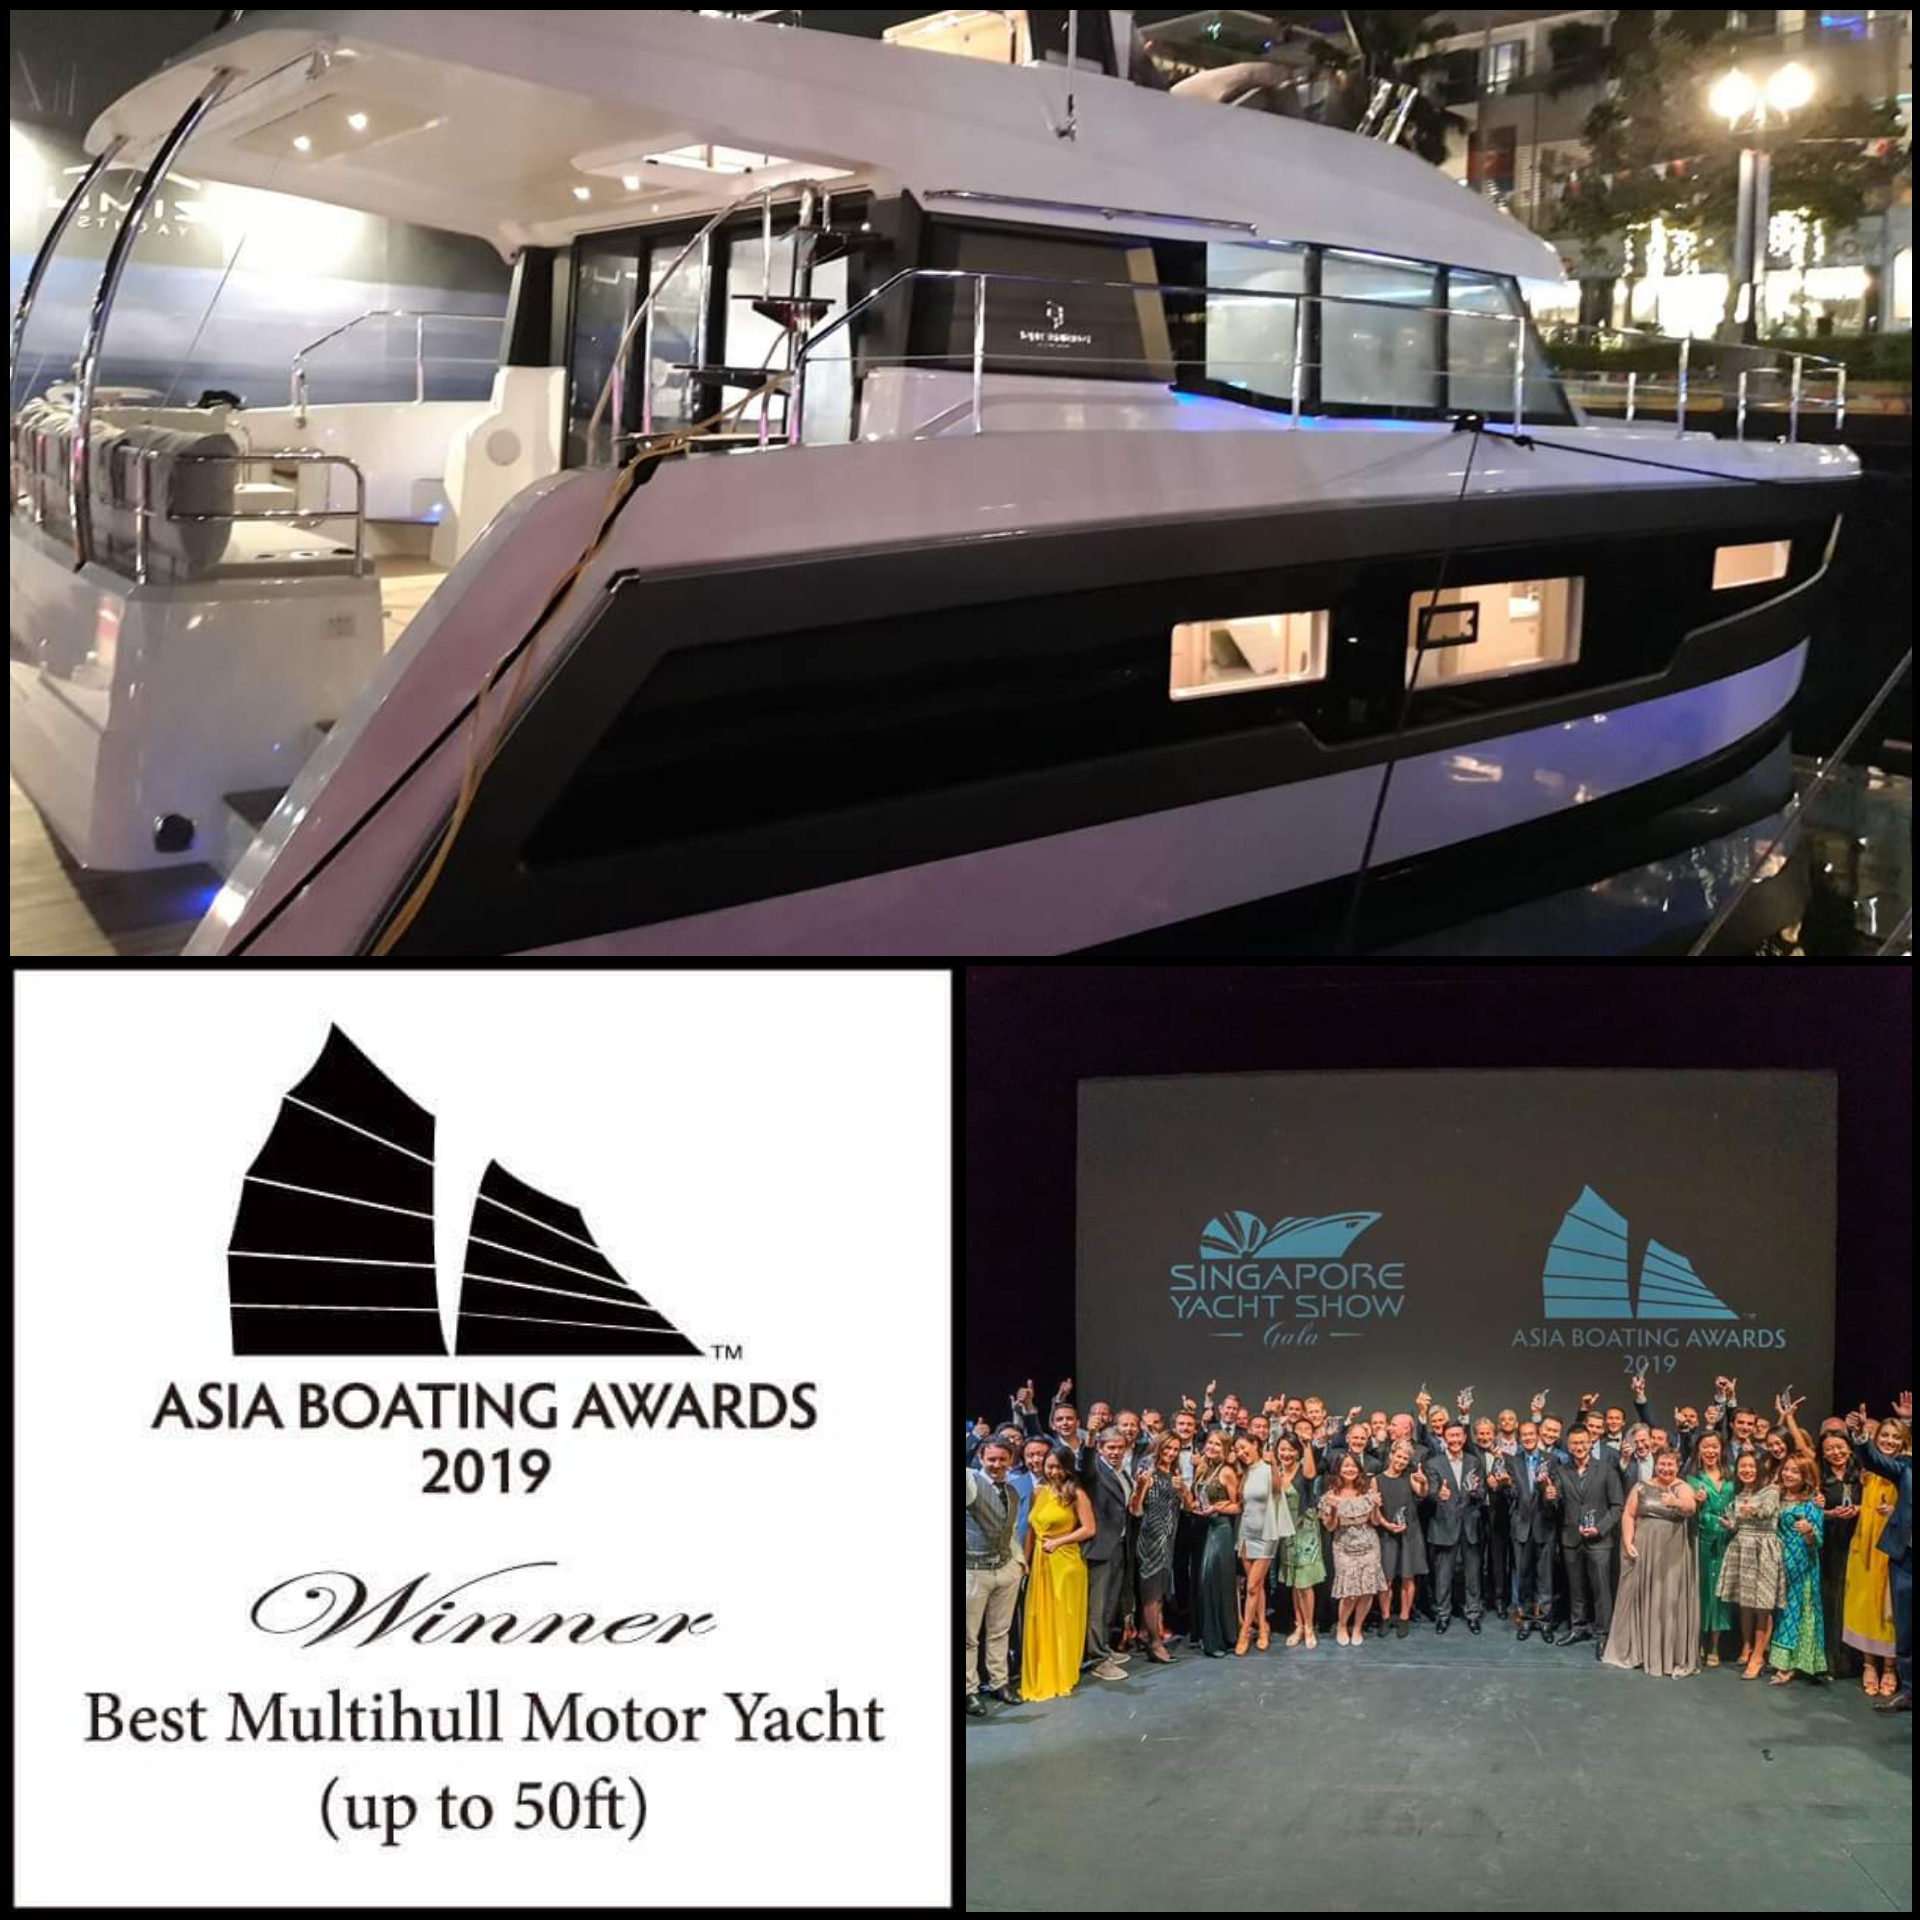 Fountaine Pajot MY 40 award at Singapore Boat Show 2019